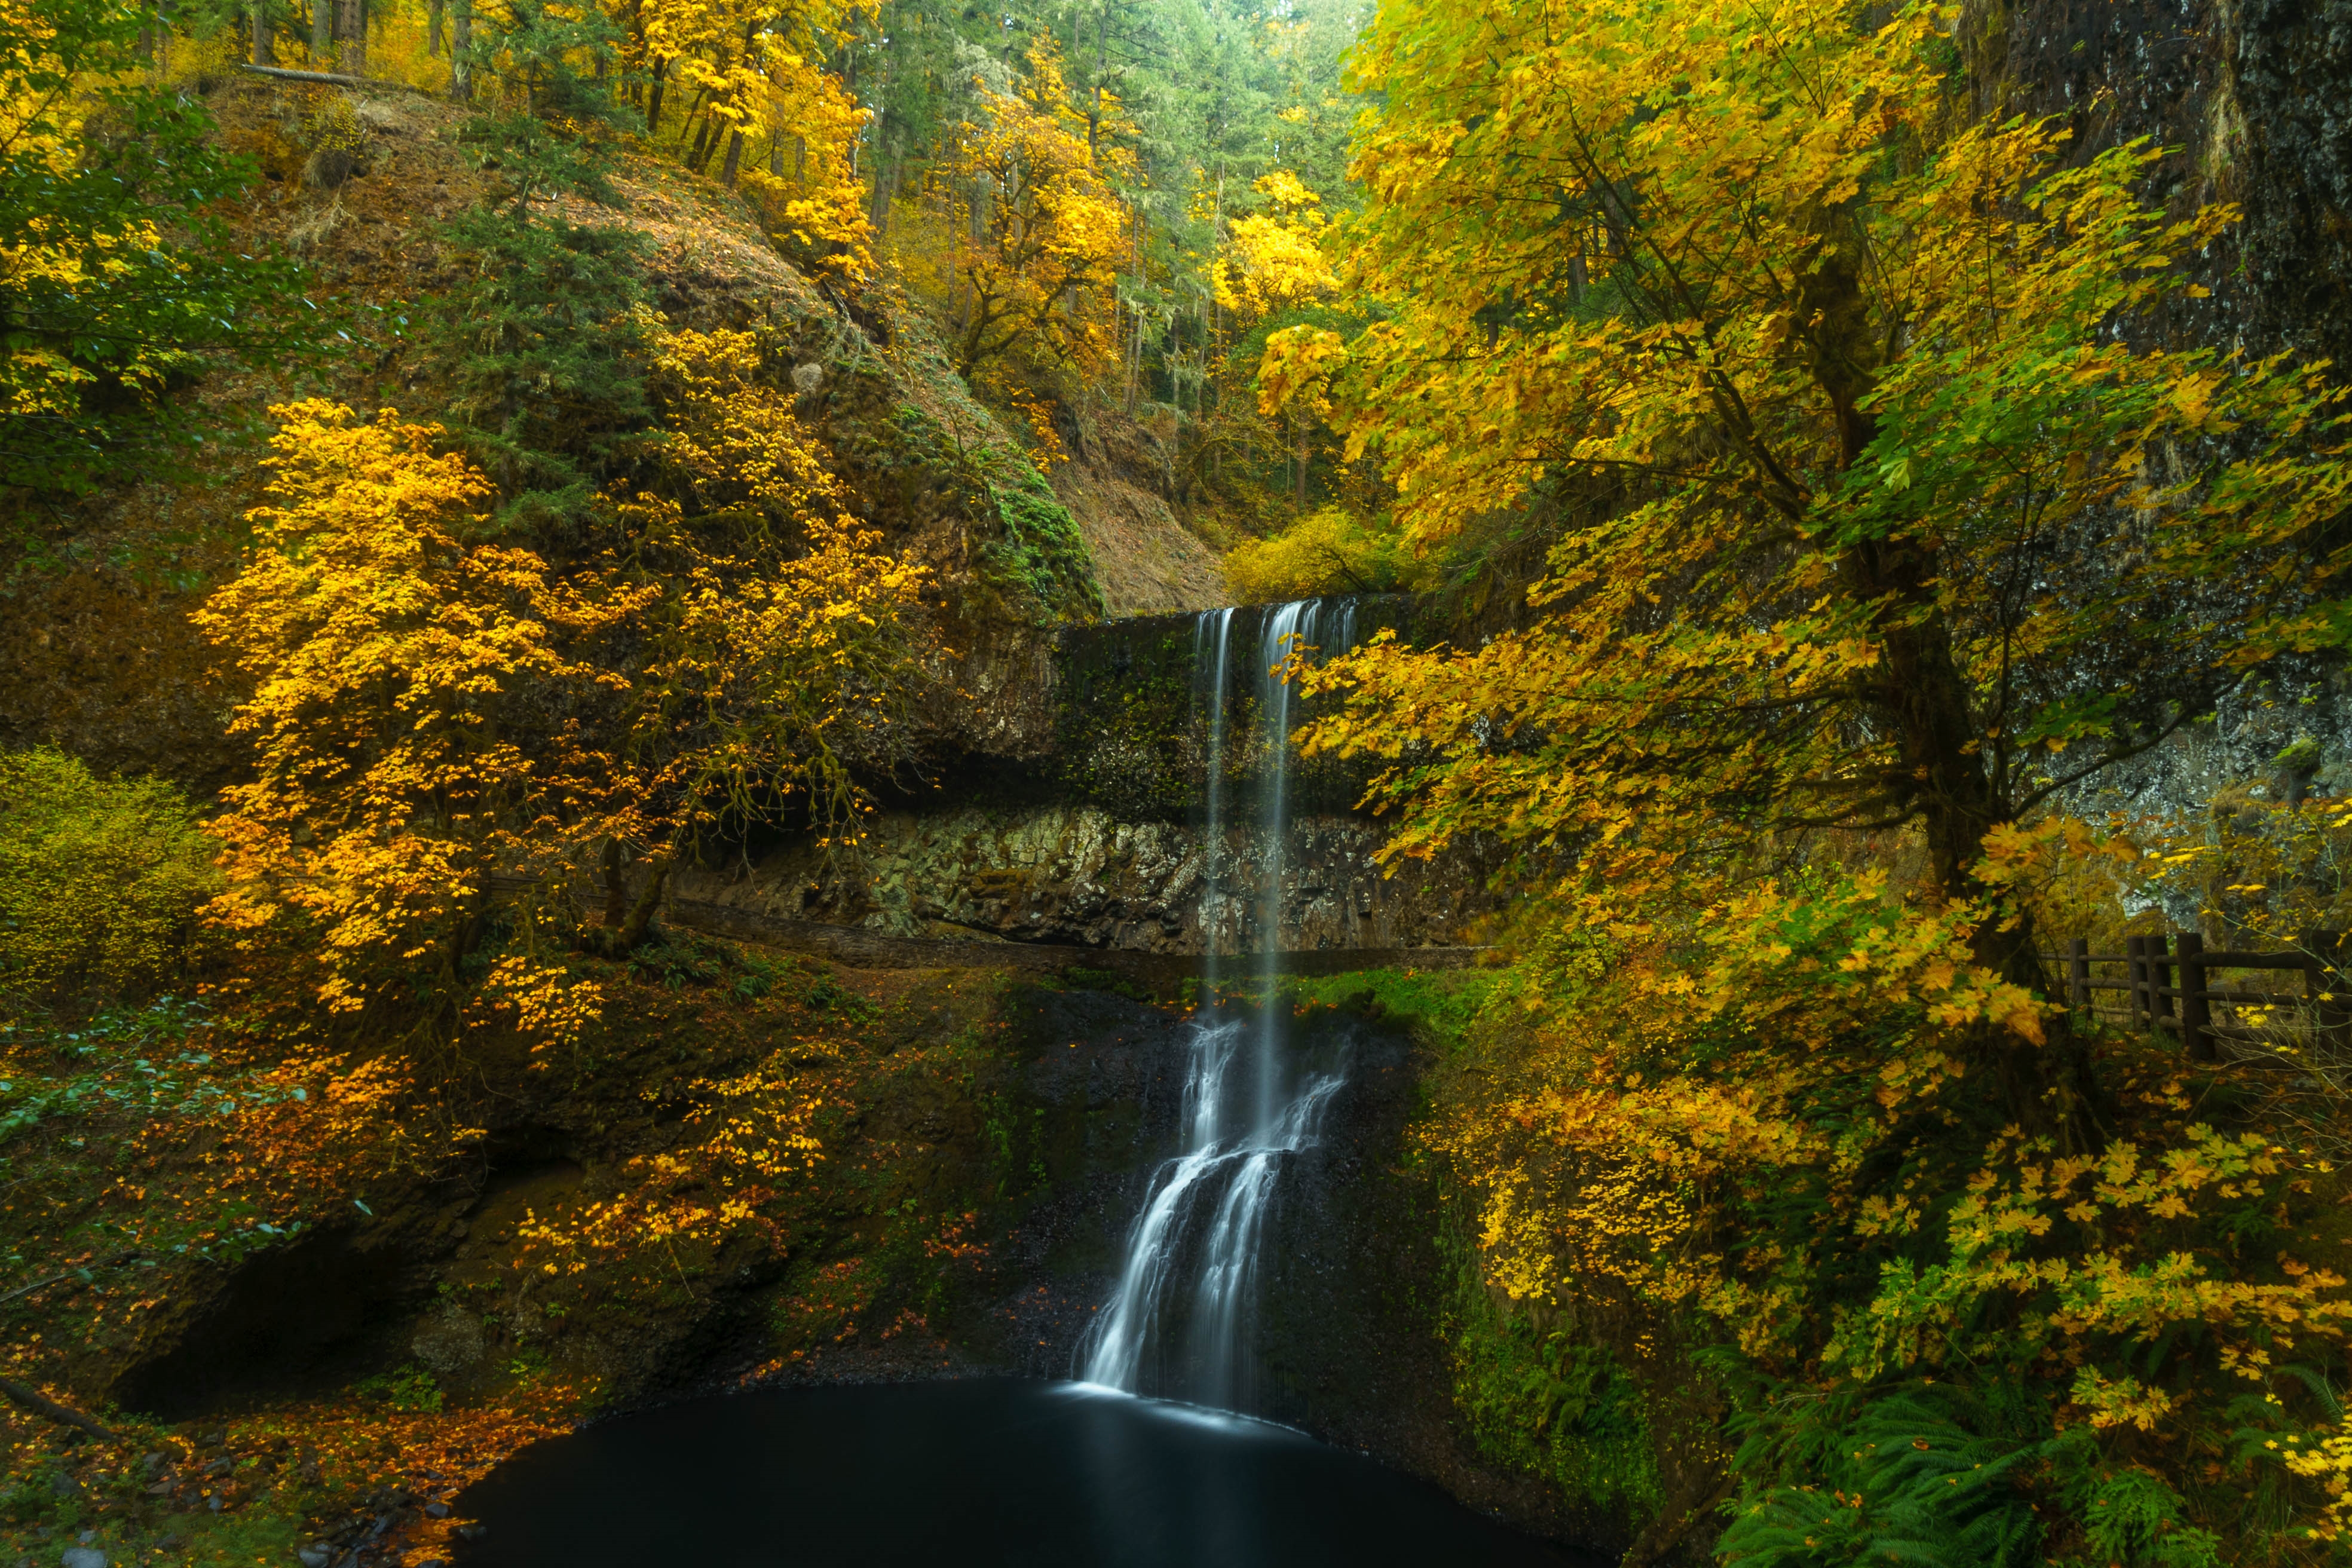 Wallpapers Lower South Falls Oregon United States on the desktop